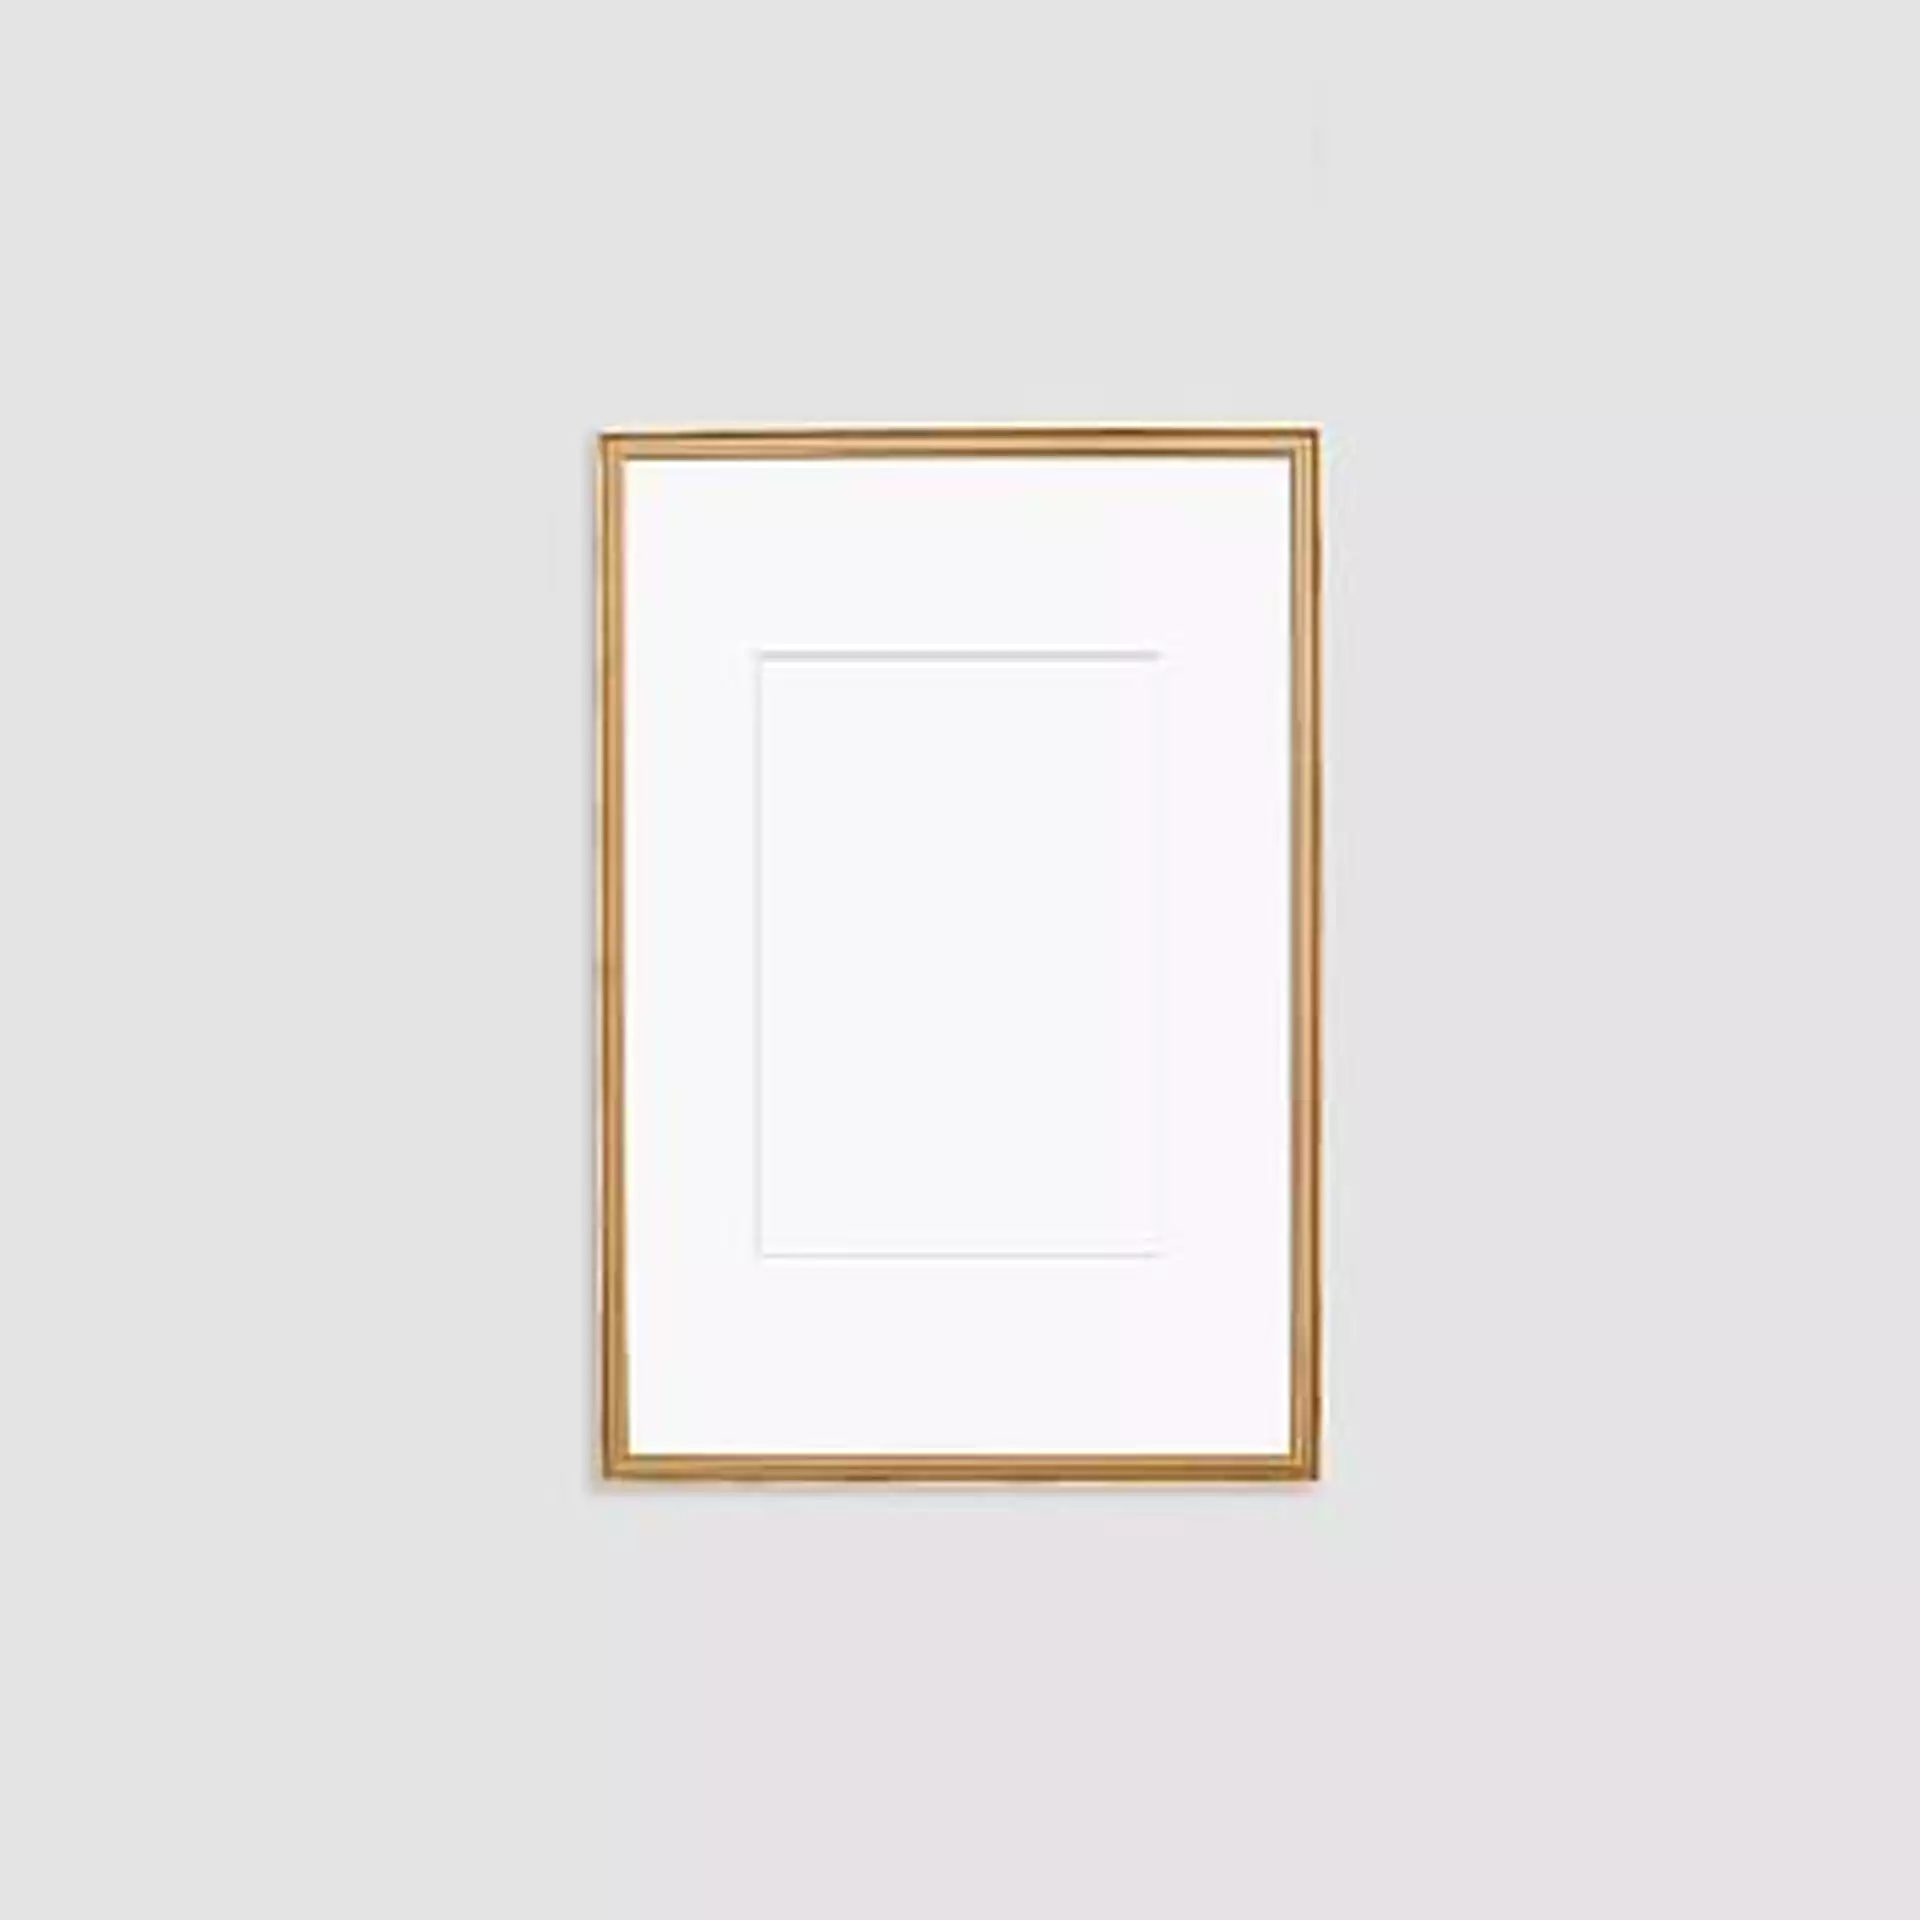 Simply Framed Oversized Gallery Frame – Antique Gold/Mat / 24"X36"